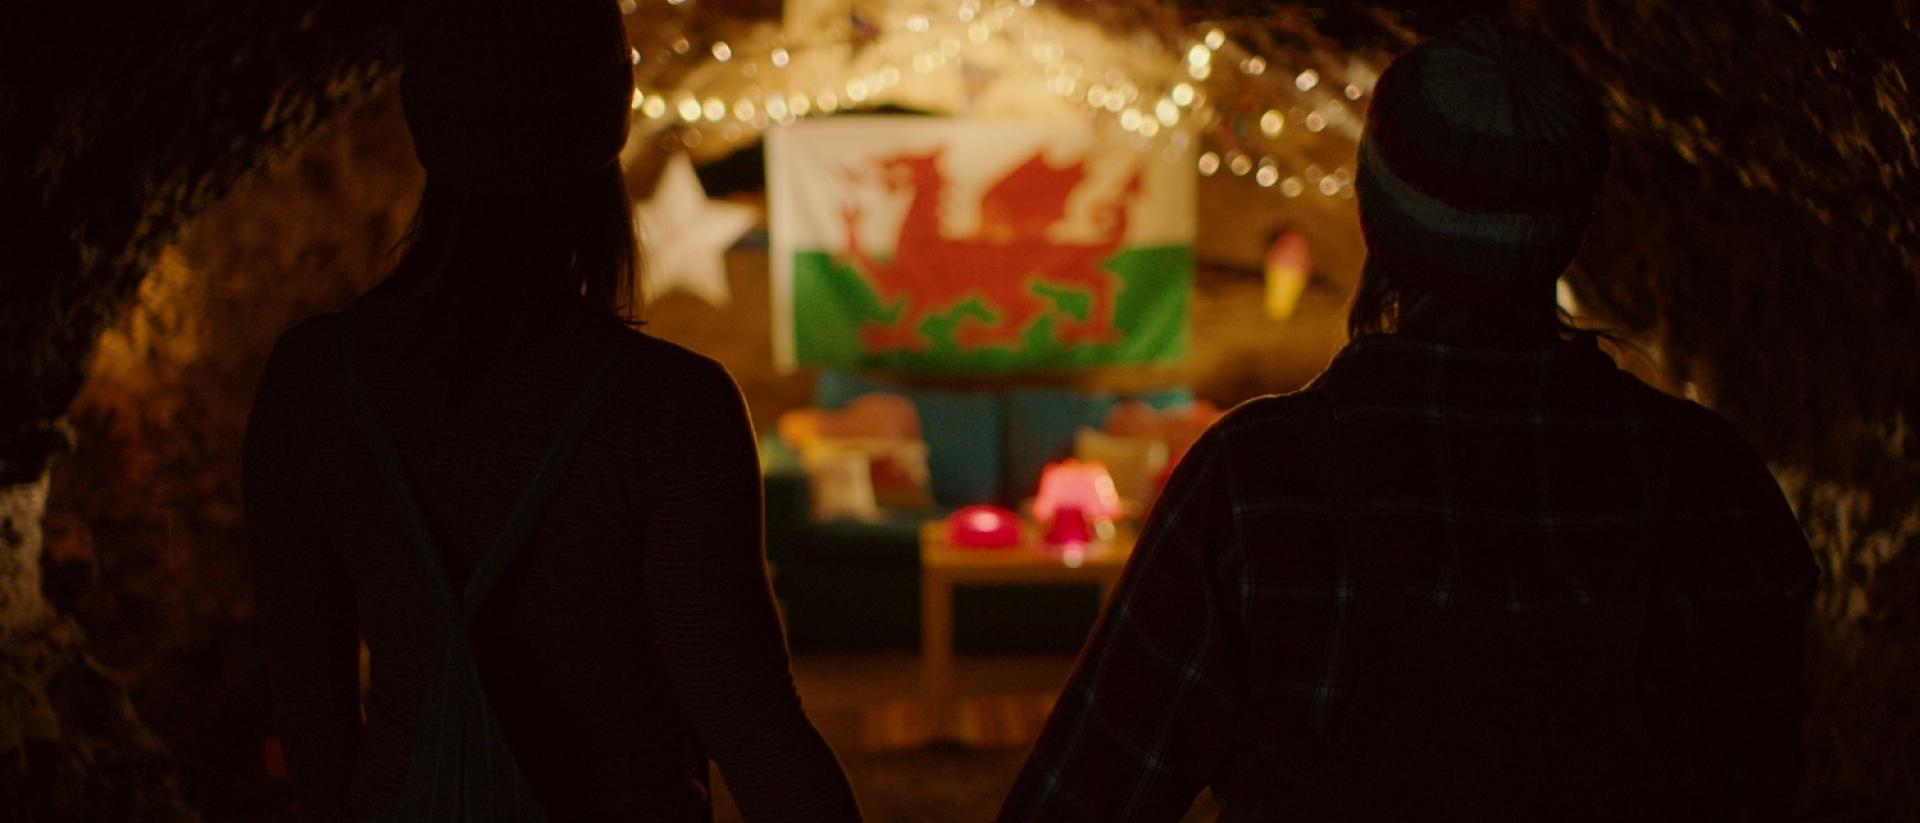 still from jelly featuring two people standing in a cave and holding hands while they look at a welsh flag on the wall, decorated with fairy lights